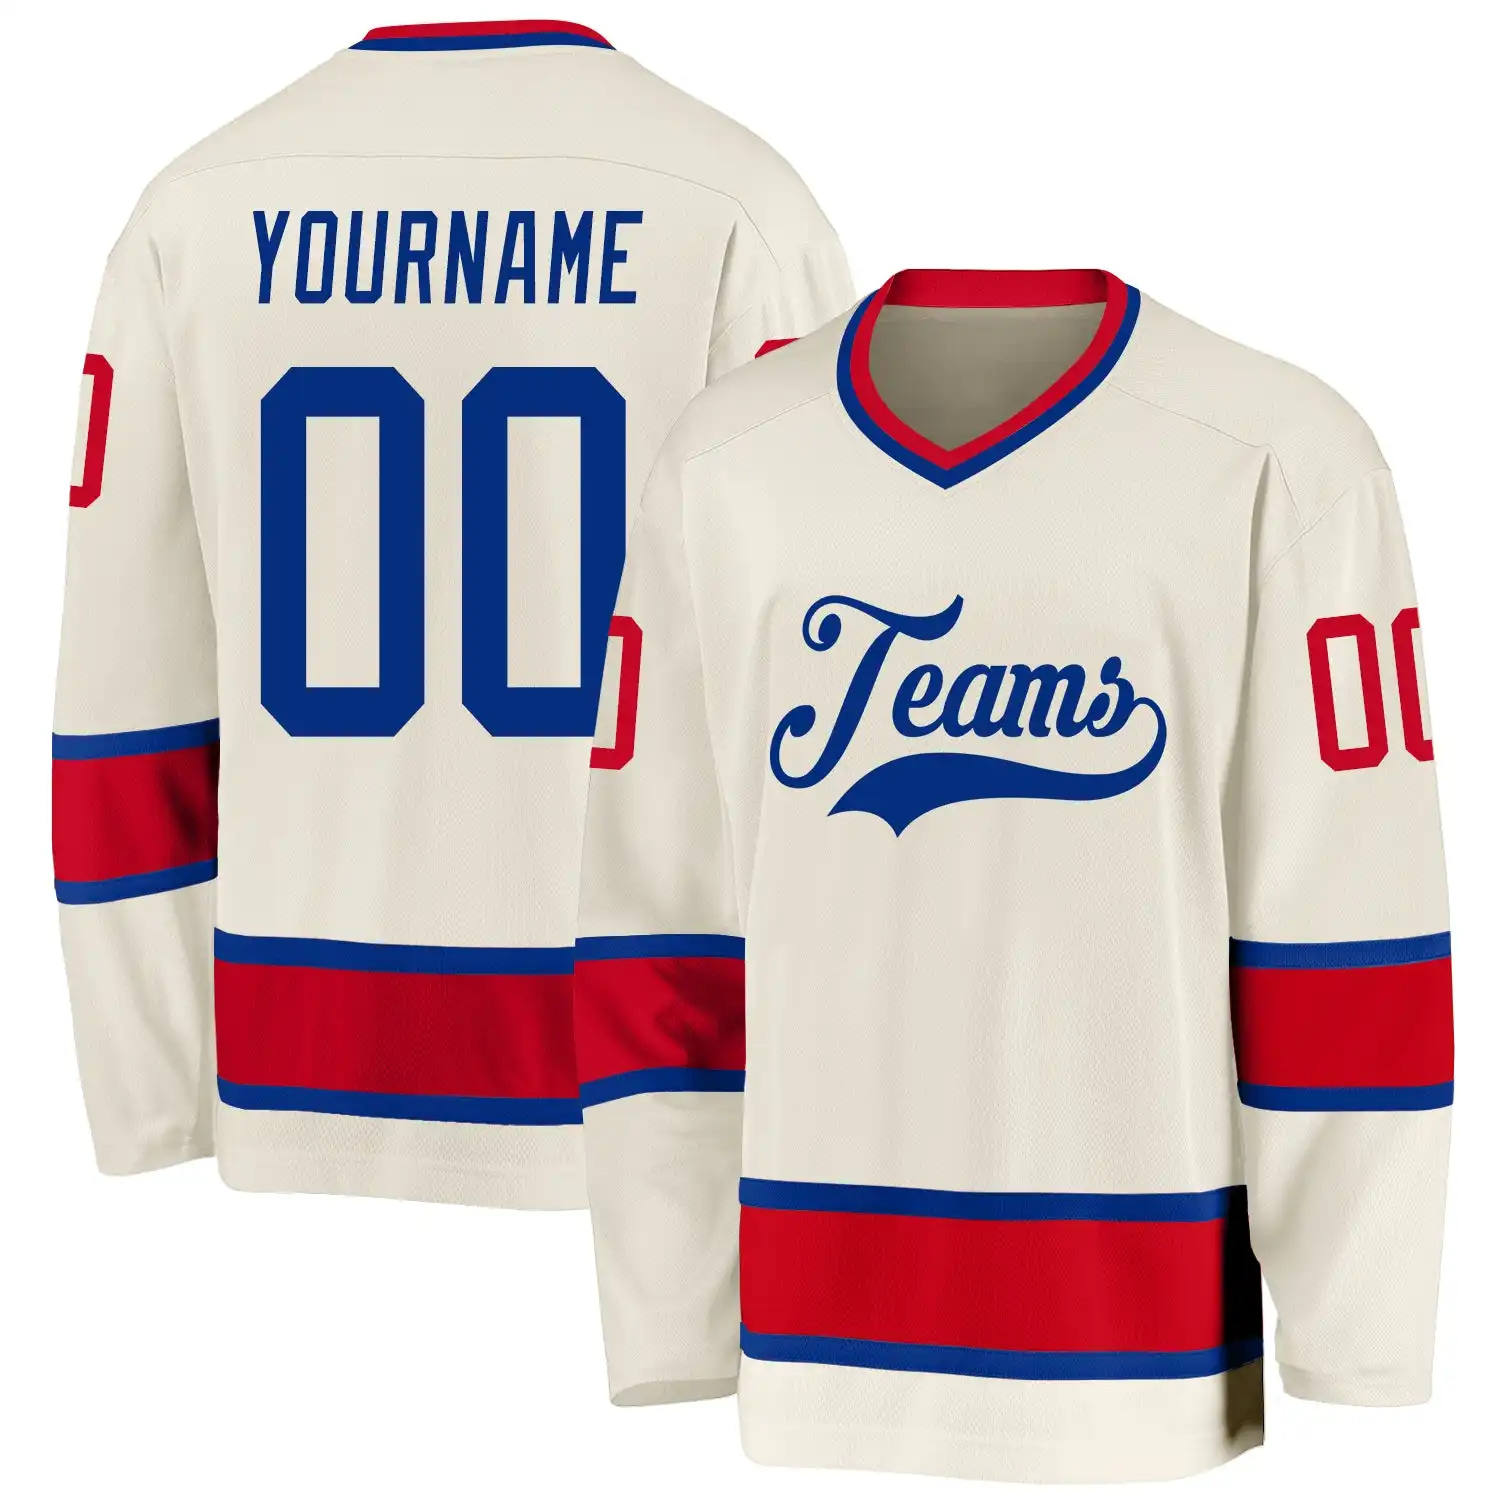 Stitched And Print Cream Royal-red Hockey Jersey Custom